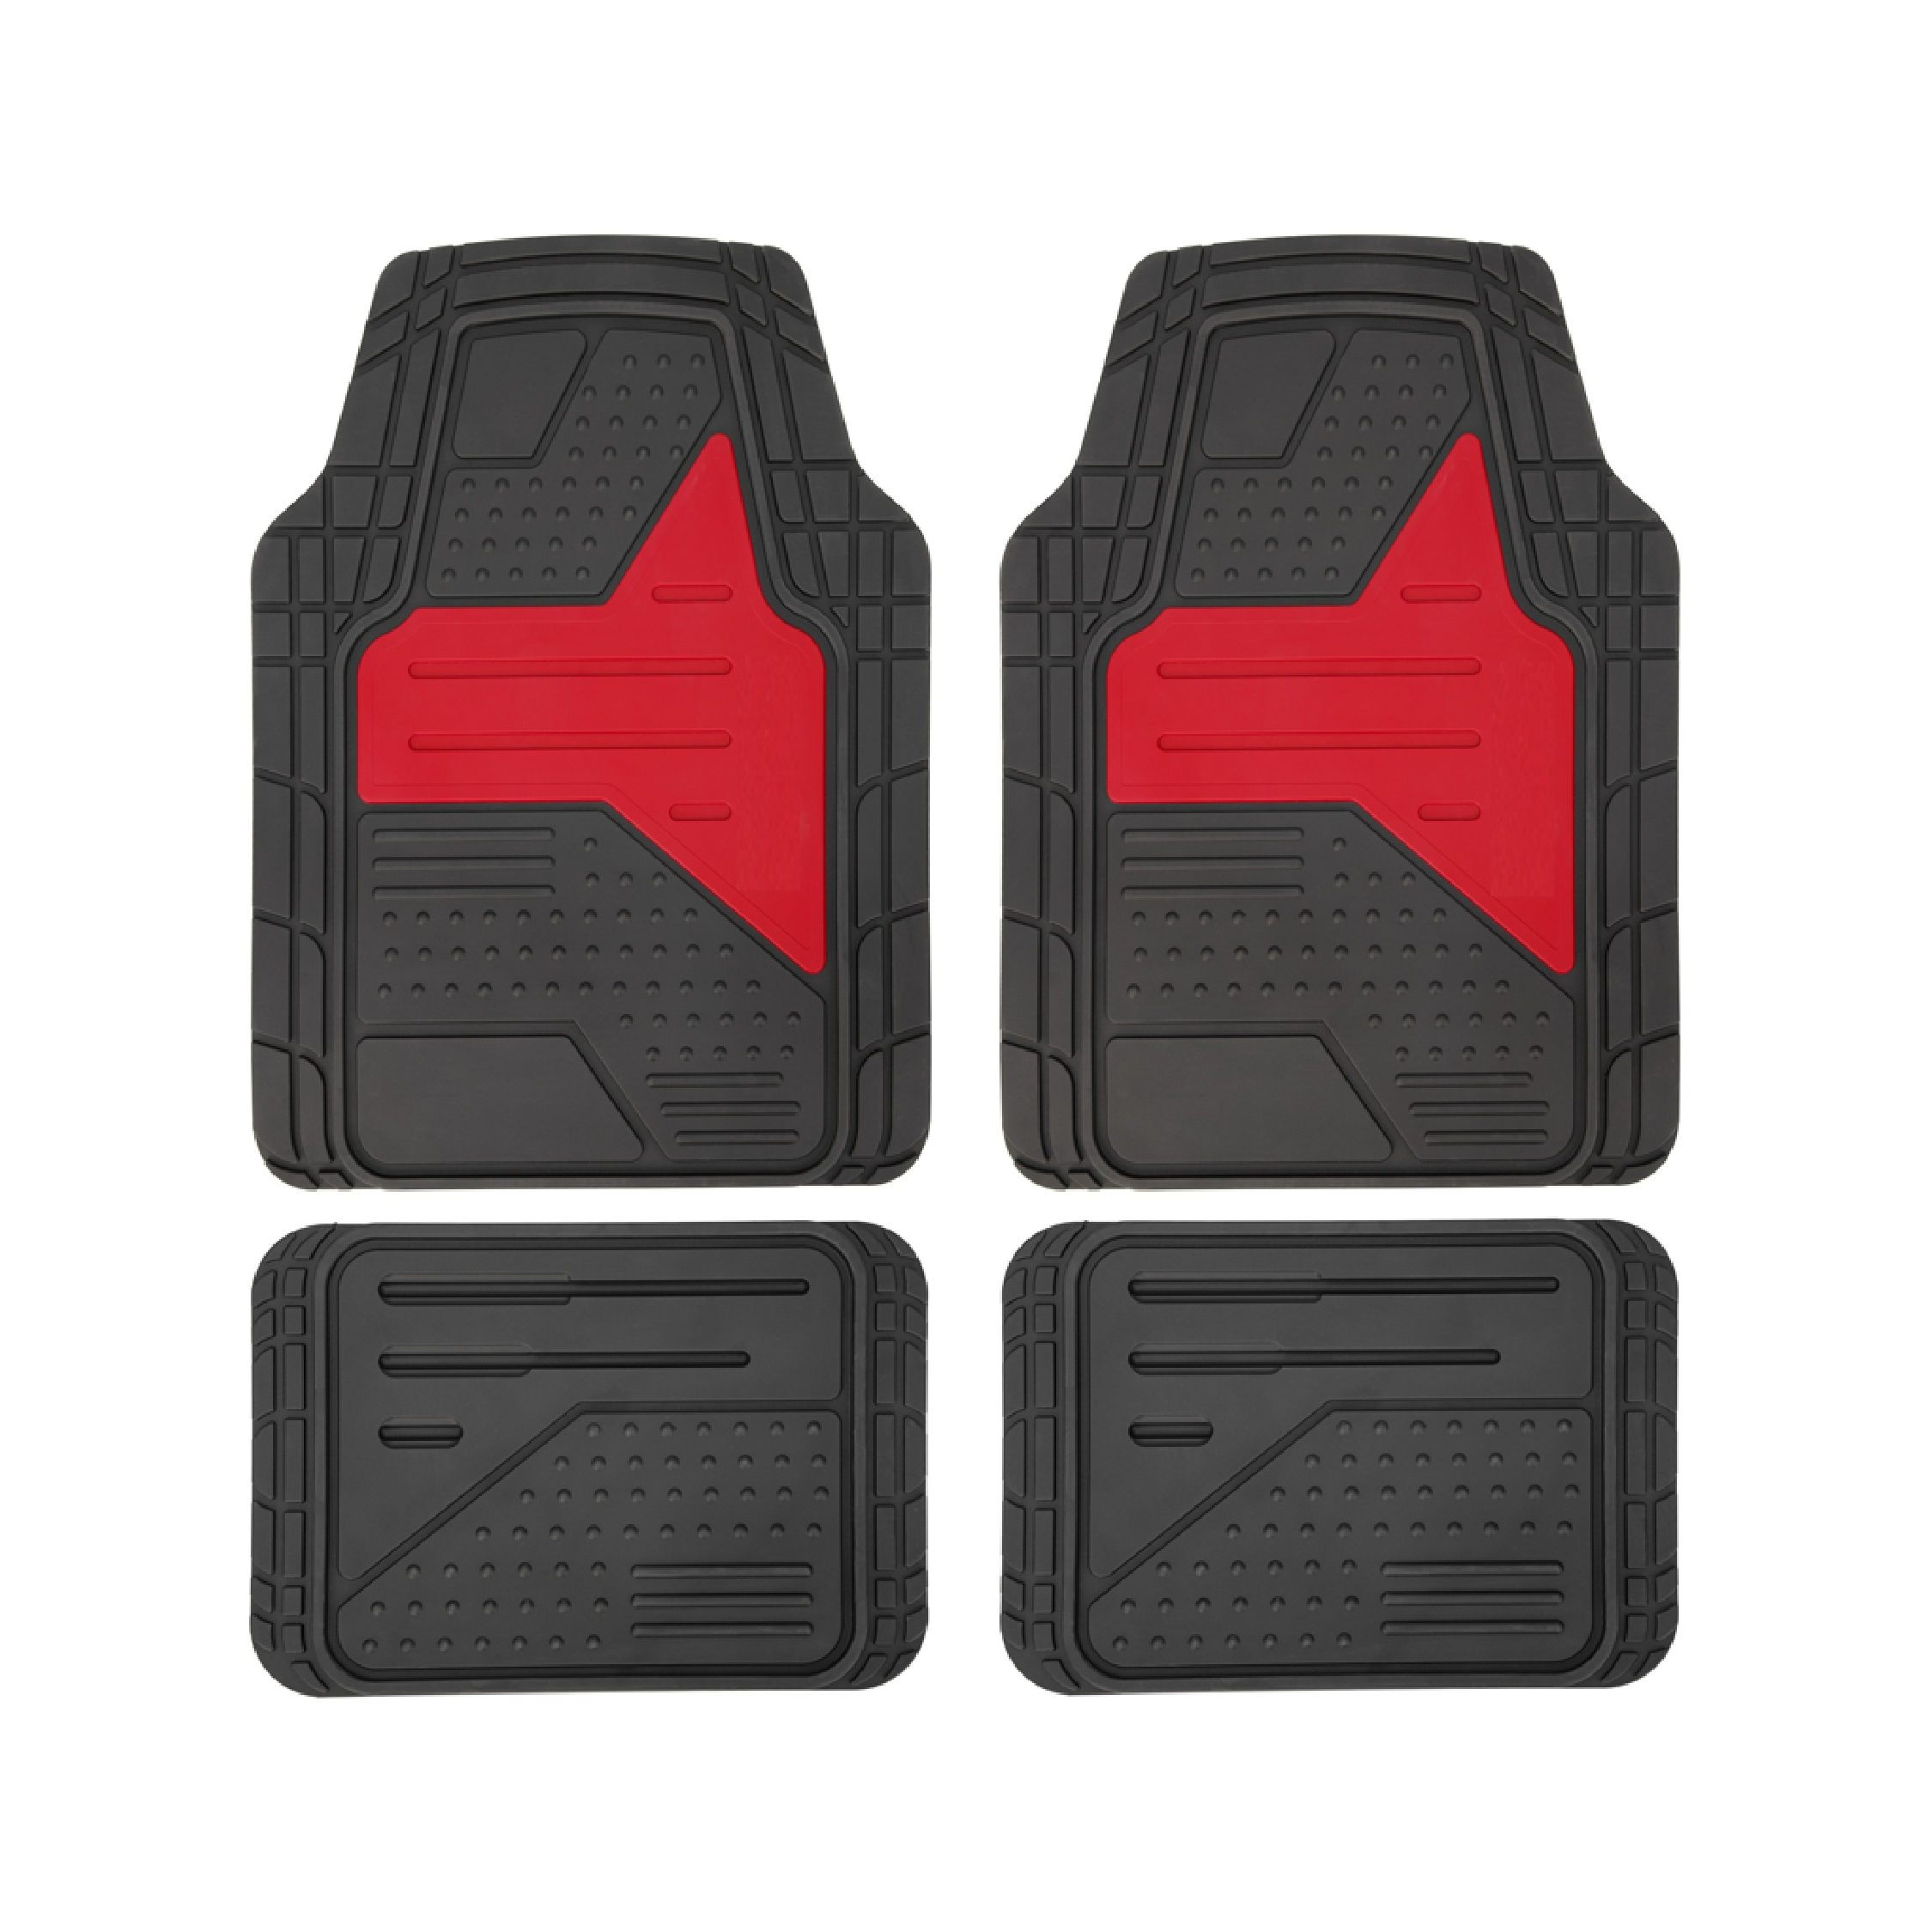 Automotive Floor Mats Red Climaproof for All Weather Protection Universal Fit Heavy Duty Rubber fits Most Cars, SUVs, and Trucks, Full Set Trim to Fit 21874